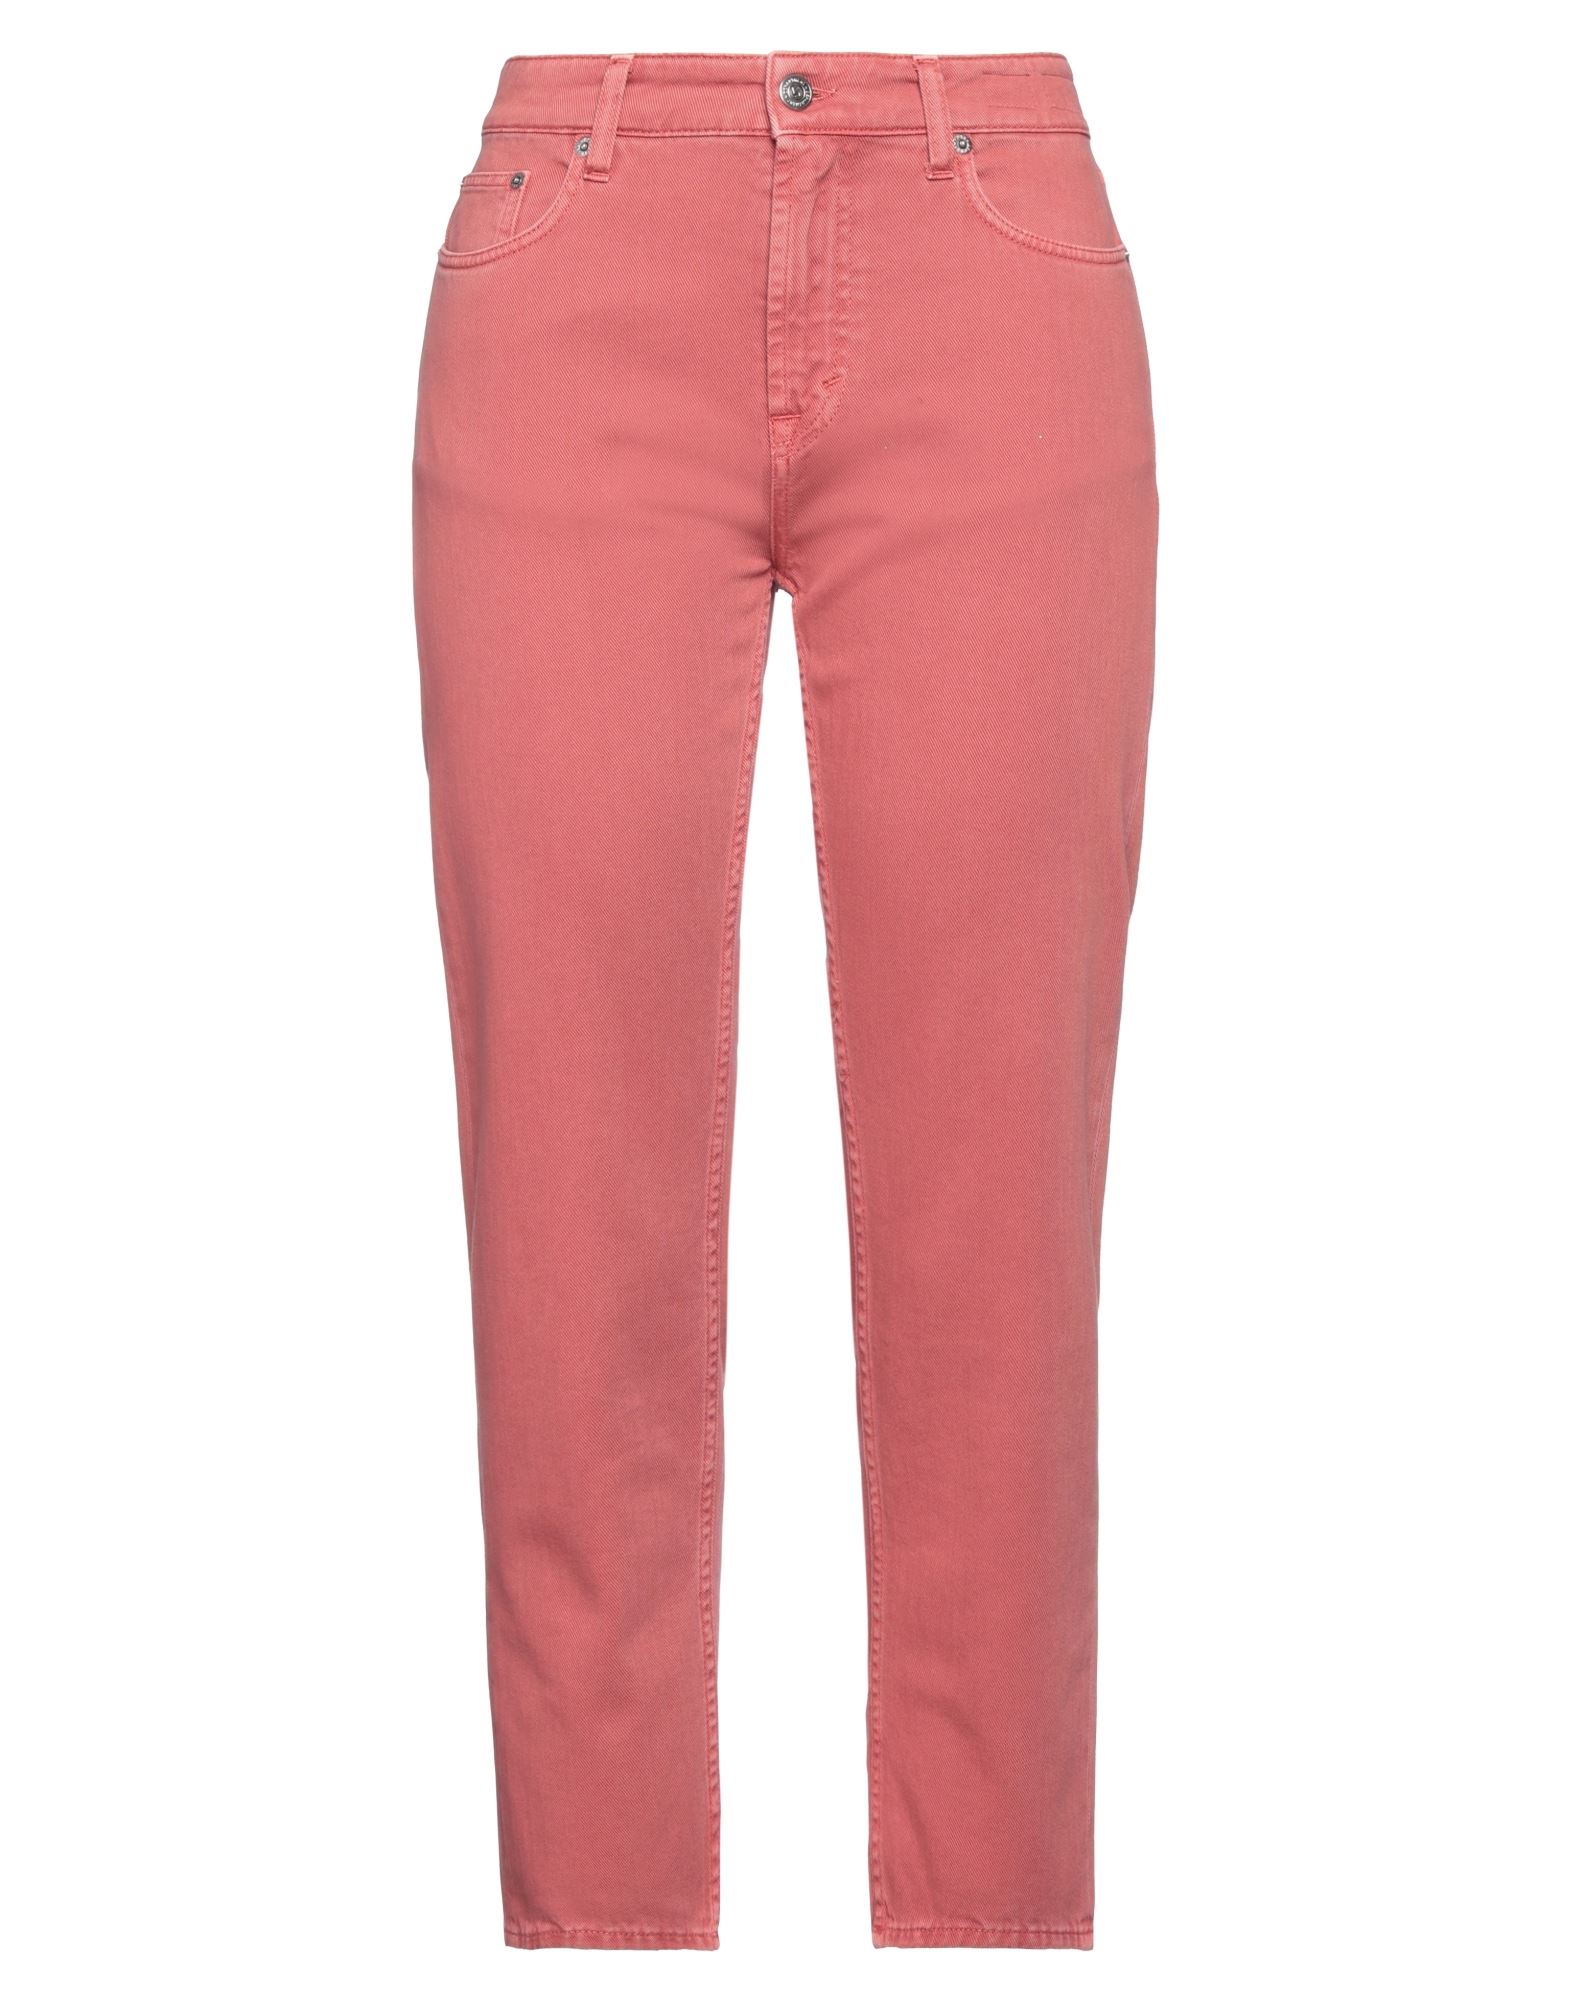 Department 5 Pants In Pink